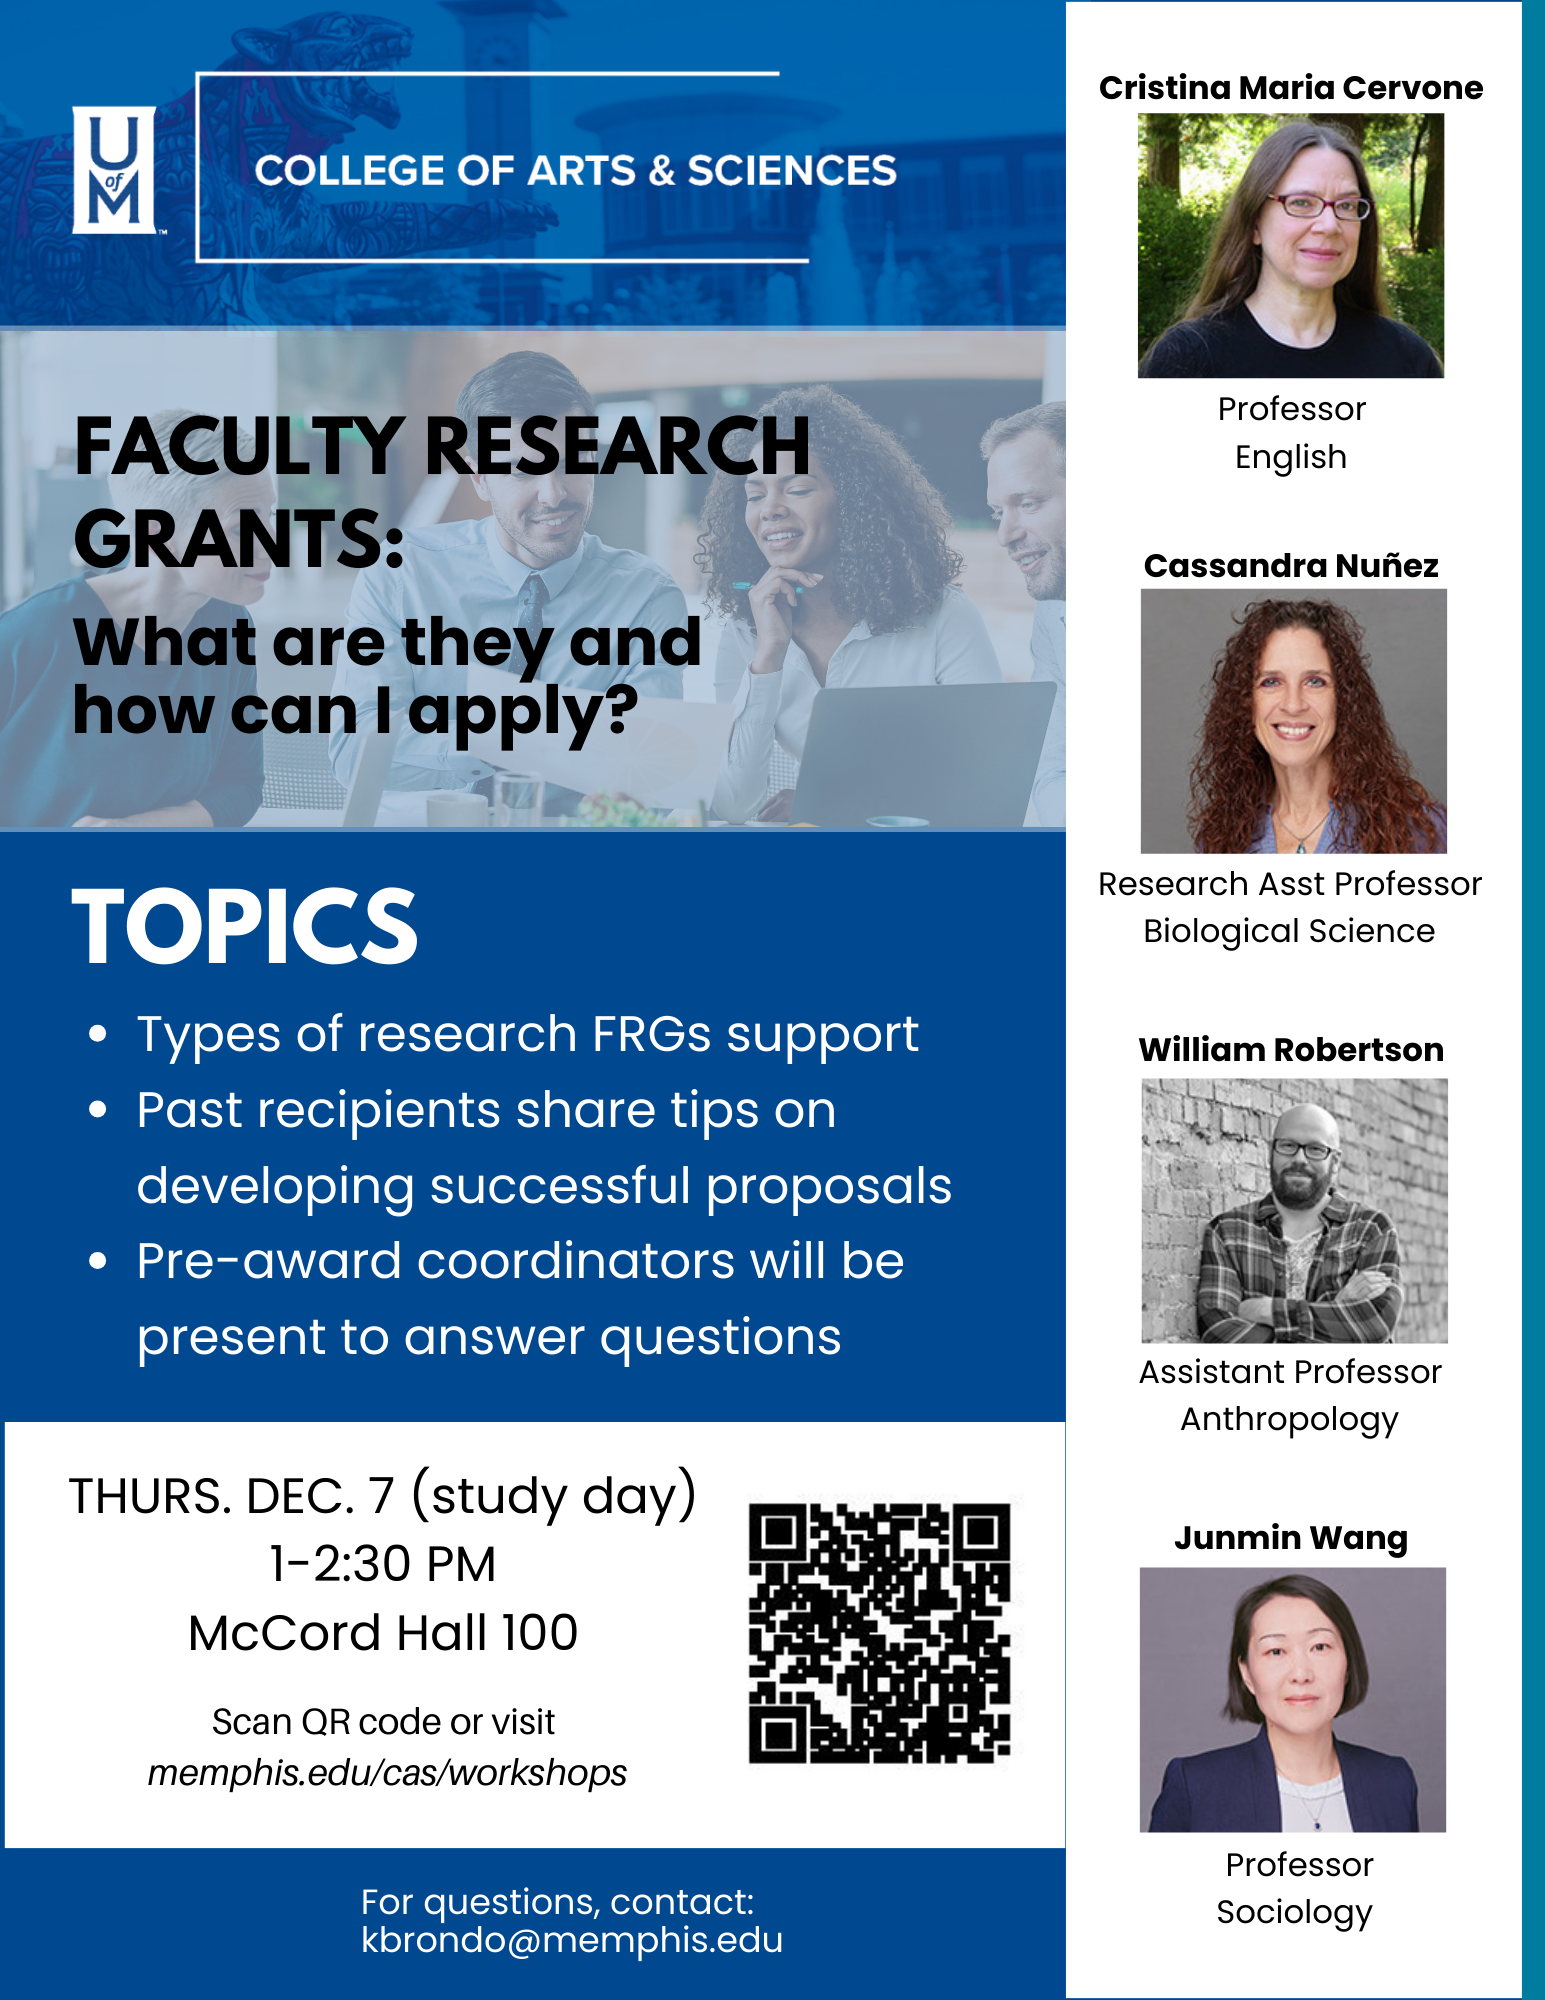 Faculty Research Grants: What are they and how can I apply?